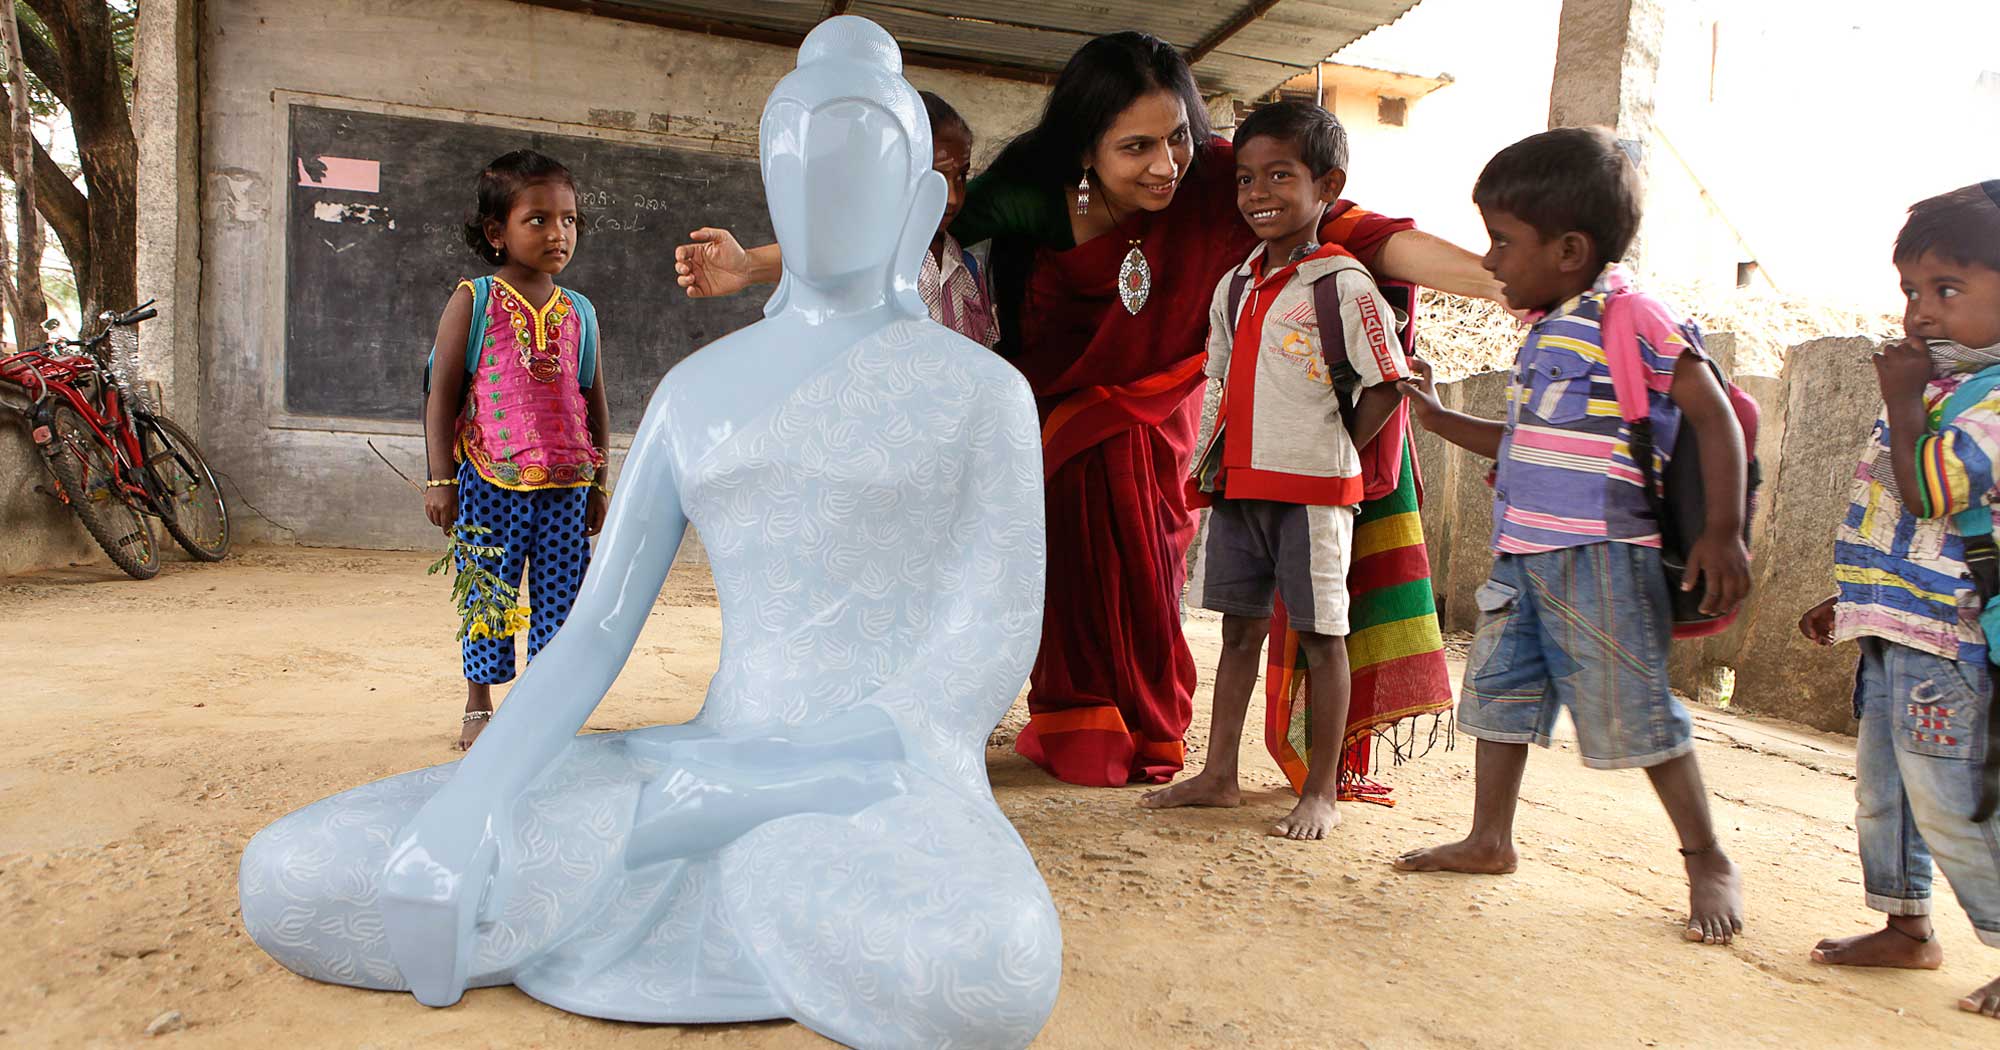 Sangeeta Abhay showing peace messenger sculpture to children with a vision to follow the buddha's path